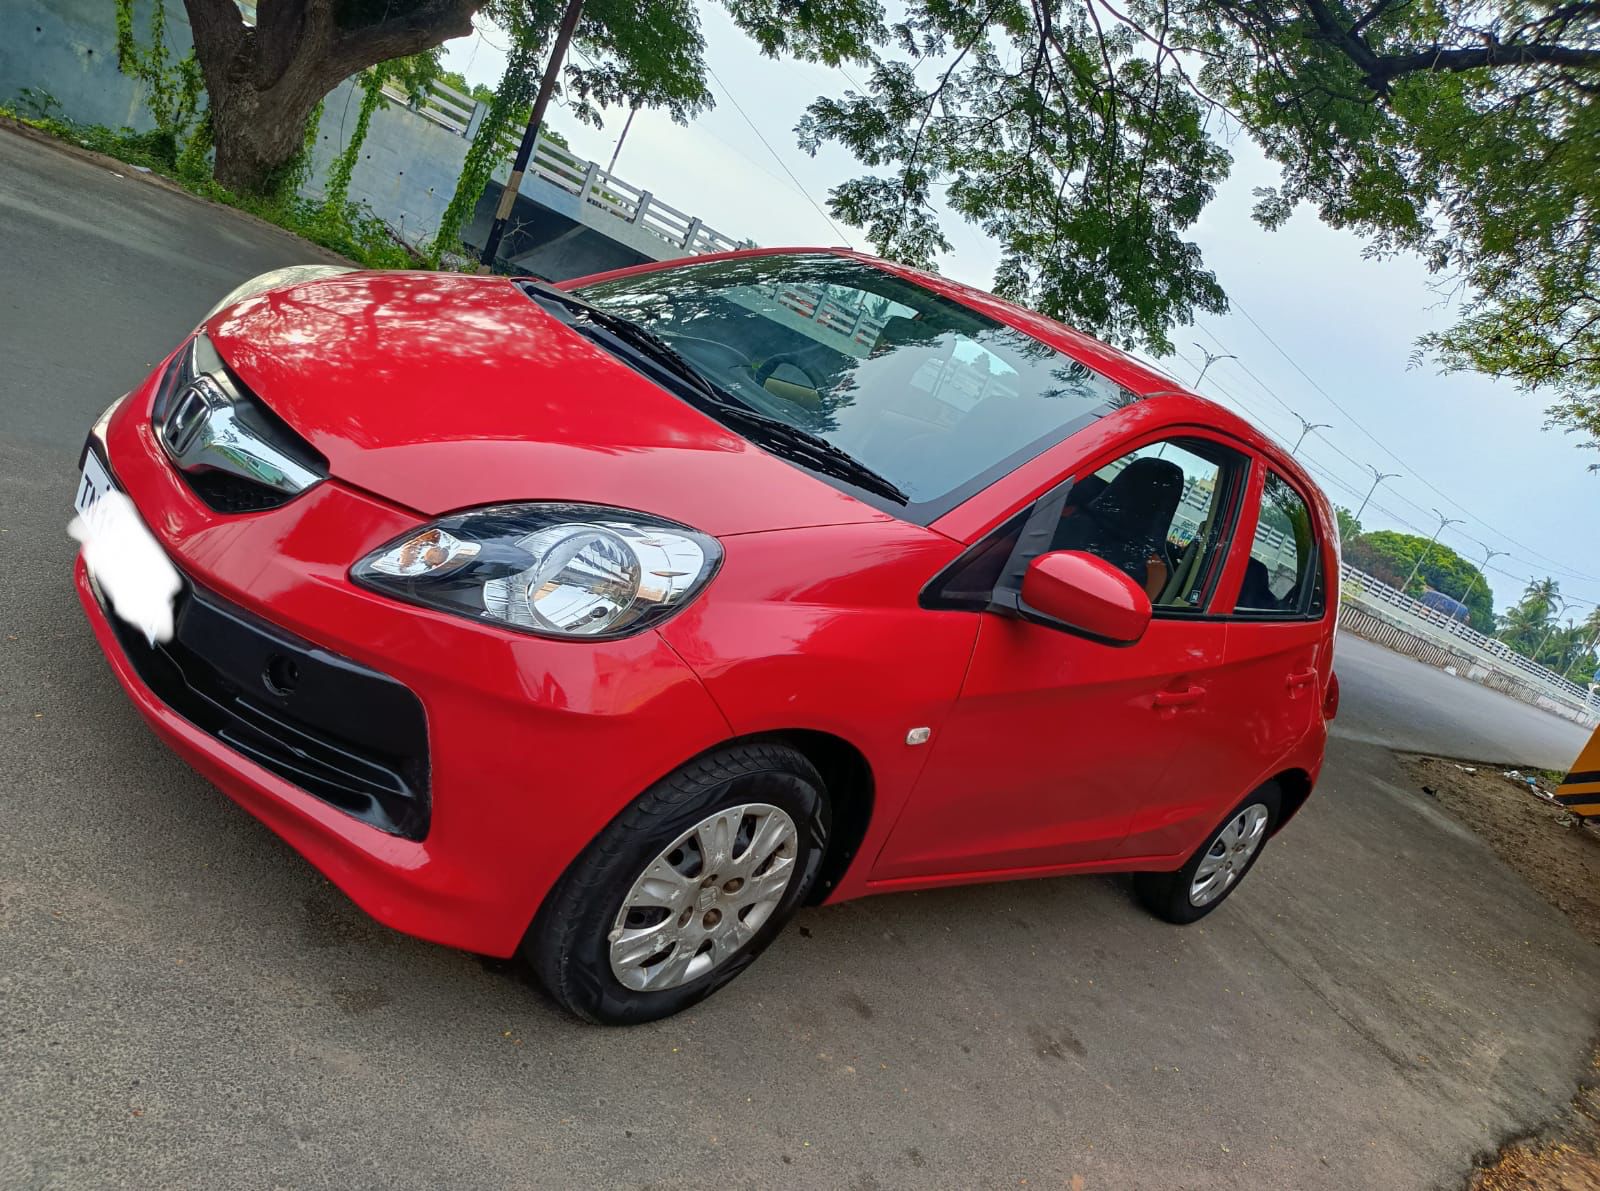 3679-for-sale-Honda-Brio-Petrol-First-Owner-2012-TN-registered-rs-299000